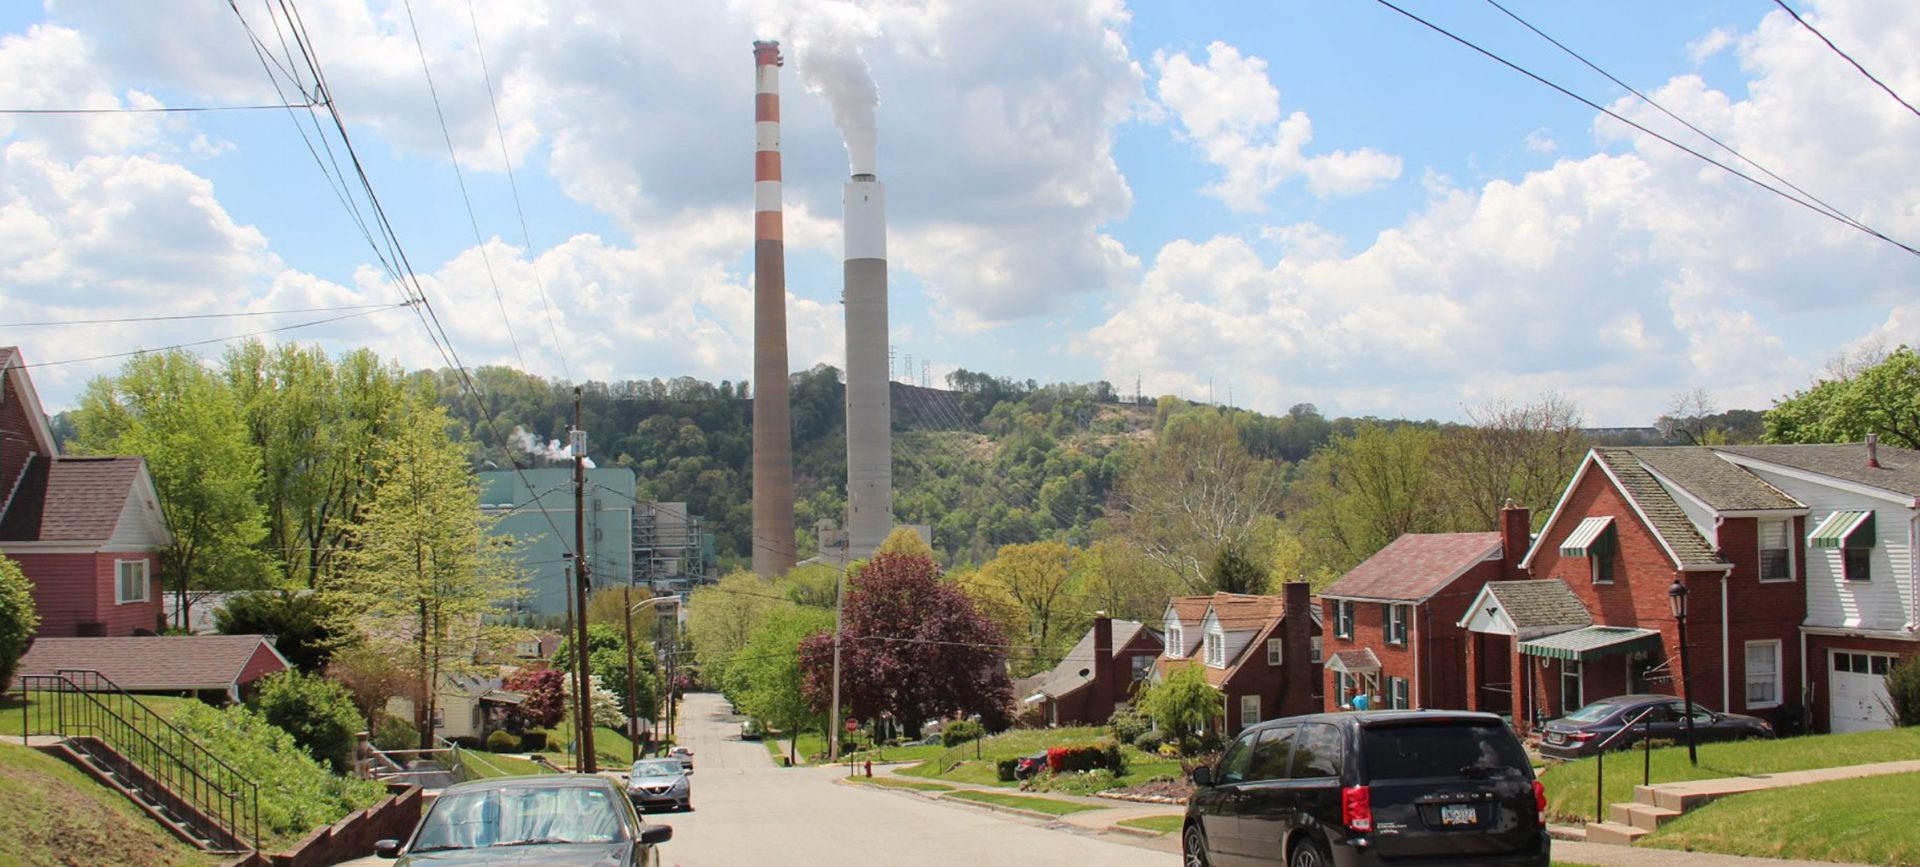 Cheswick Generating Station in Springdale, Pa. Owner GenOn Holdings says the plant will close in September 2021.